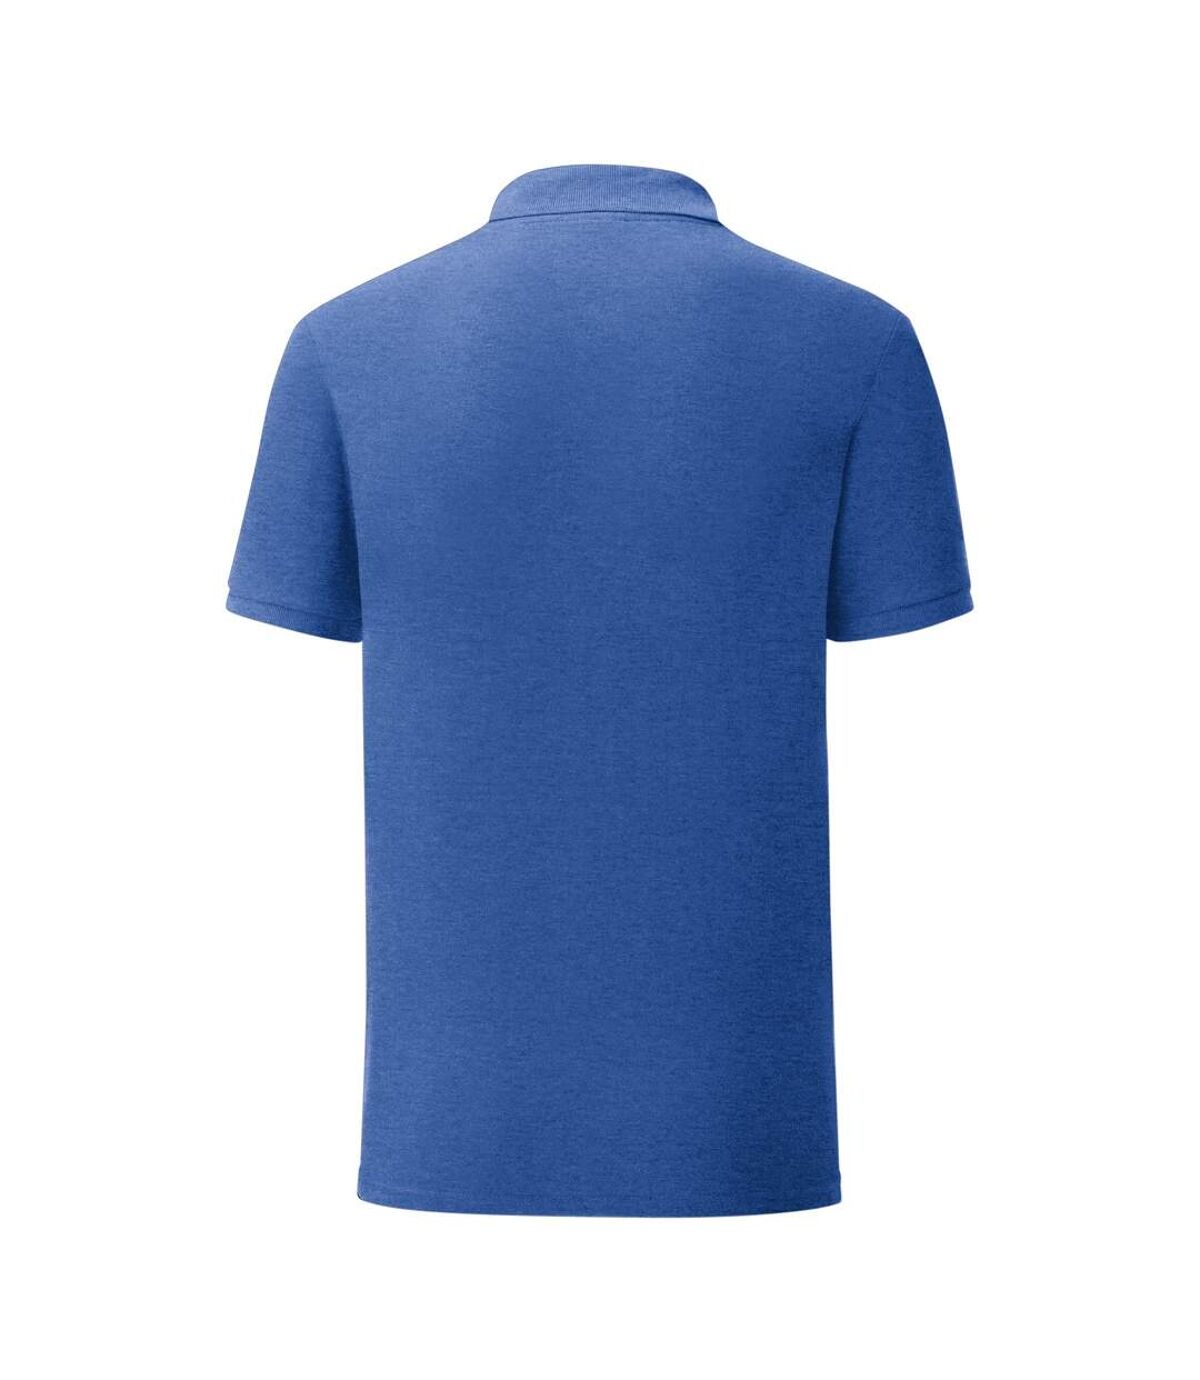 Fruit Of The Loom Mens Iconic Pique Polo Shirt (Heather Royal) - UTPC3571